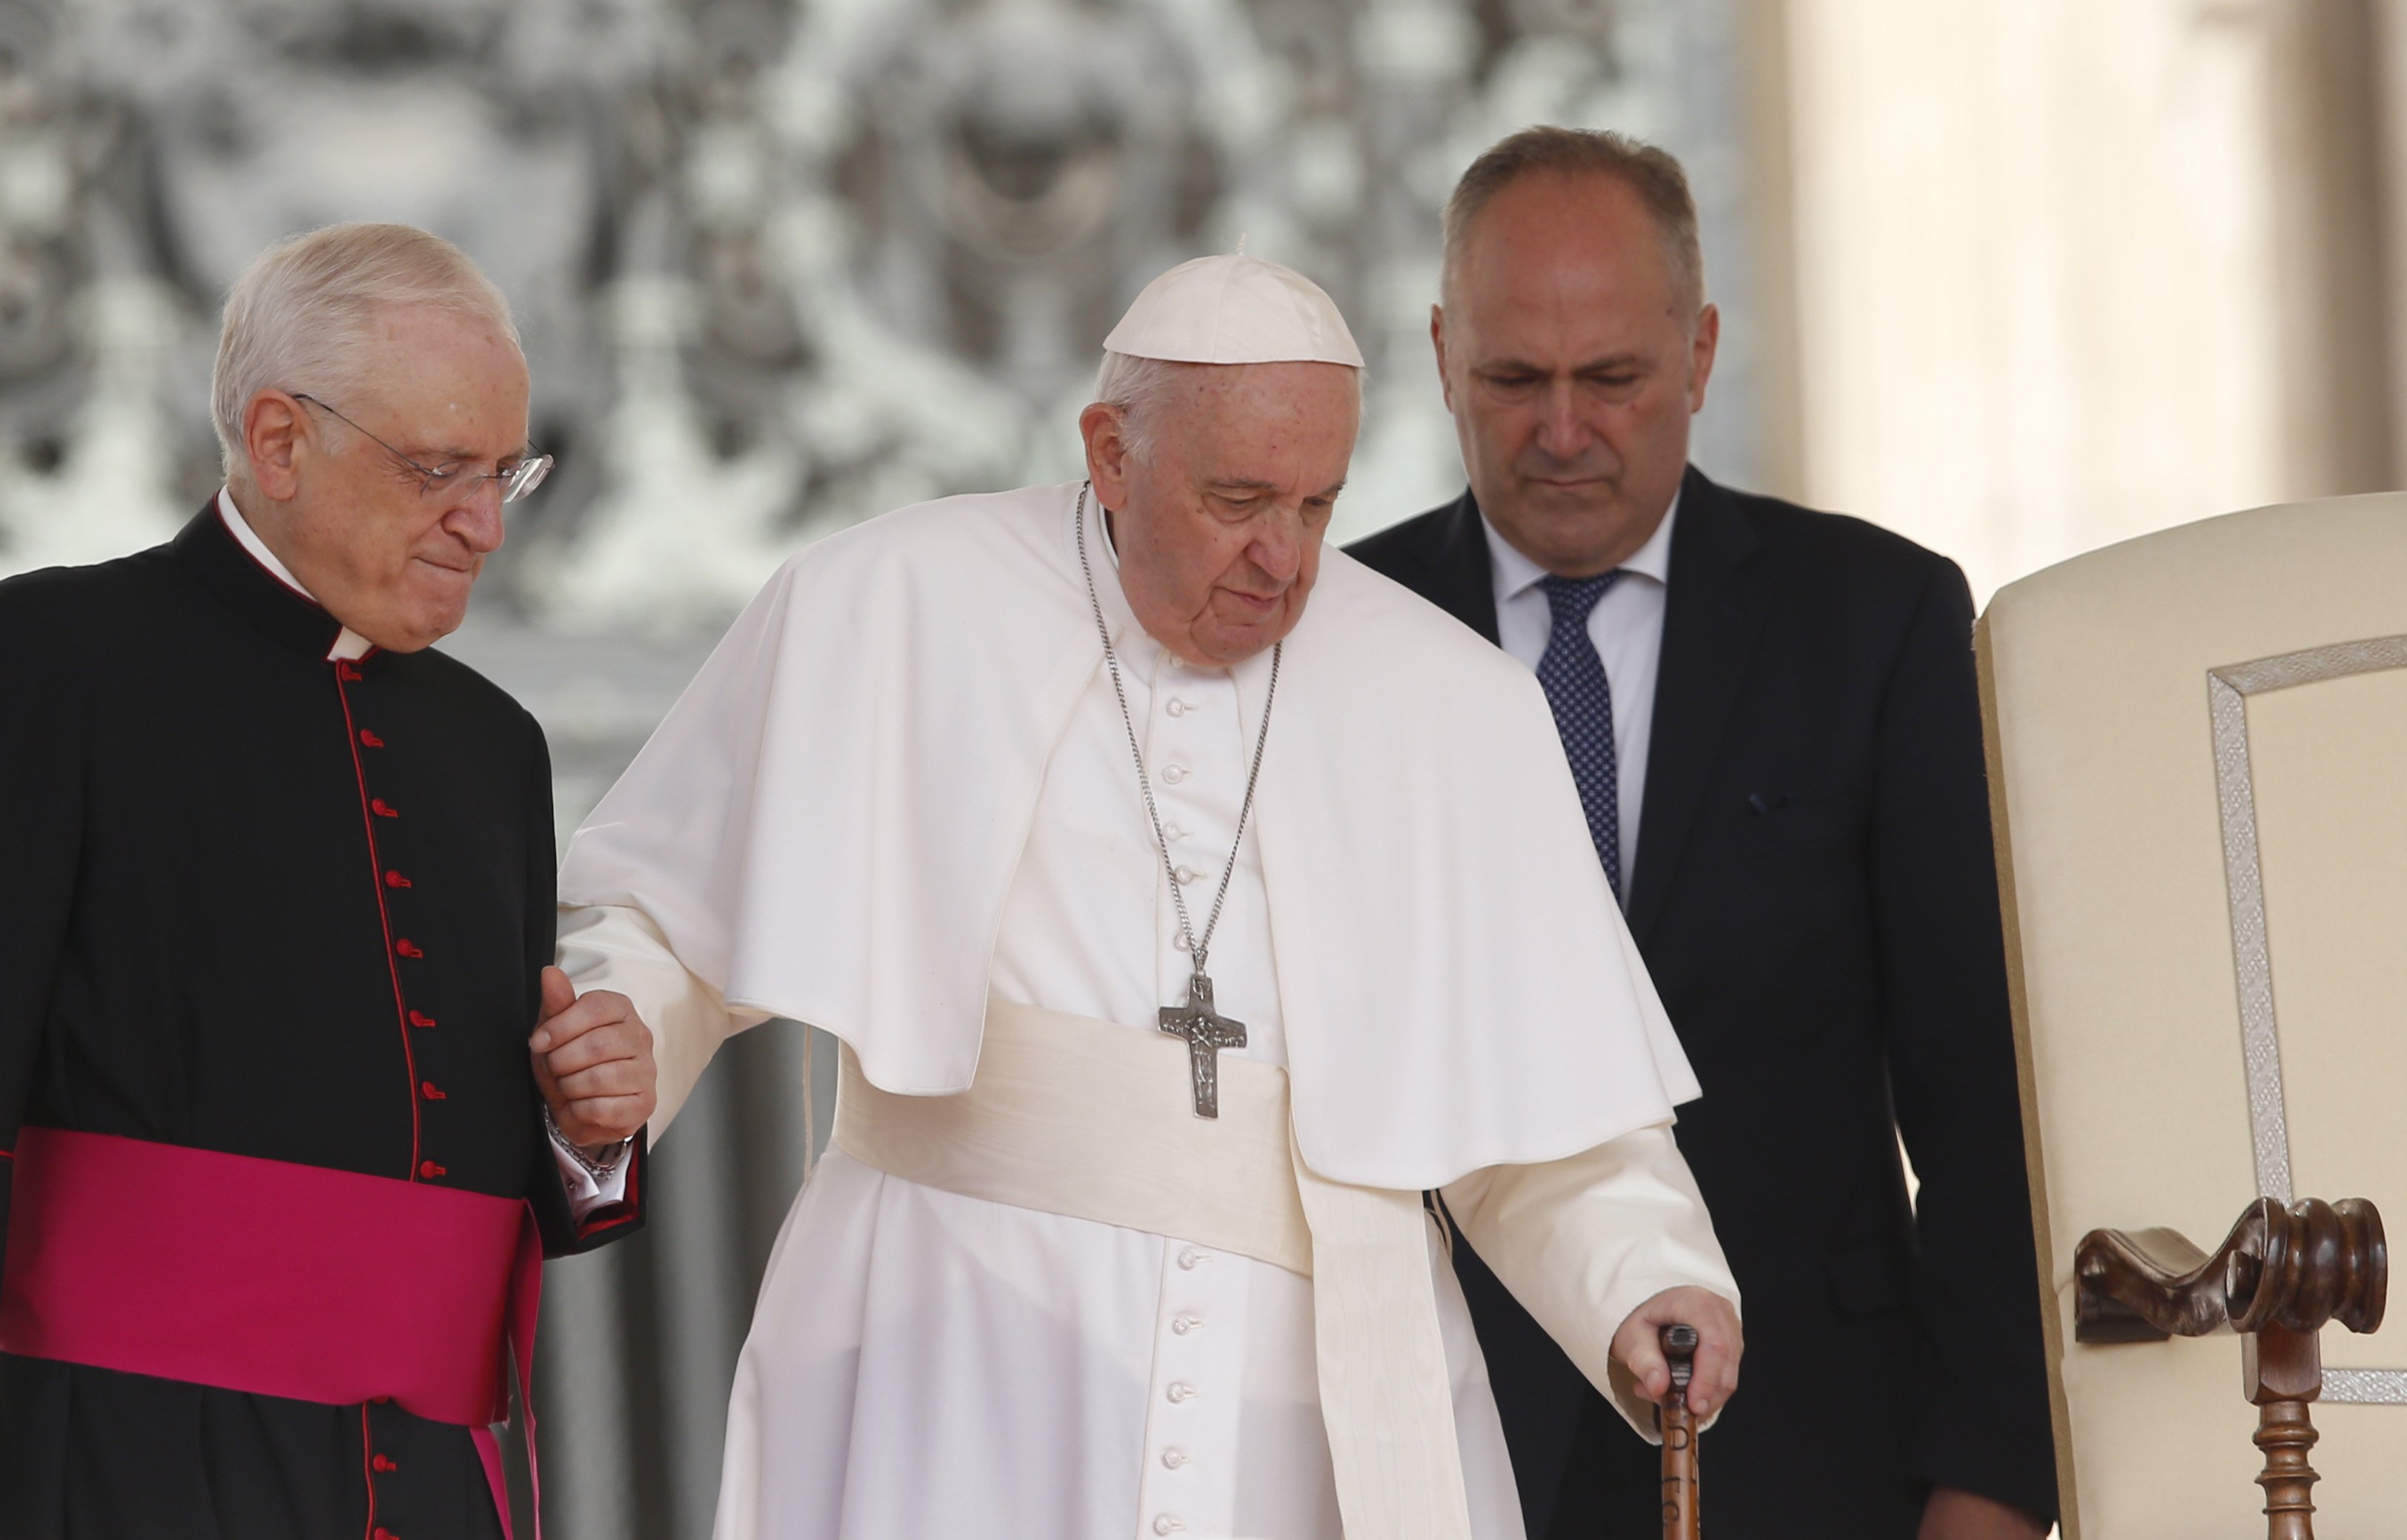 Pope Francis: old age, forced to depend on others. That's where our faith grow. | Magazine